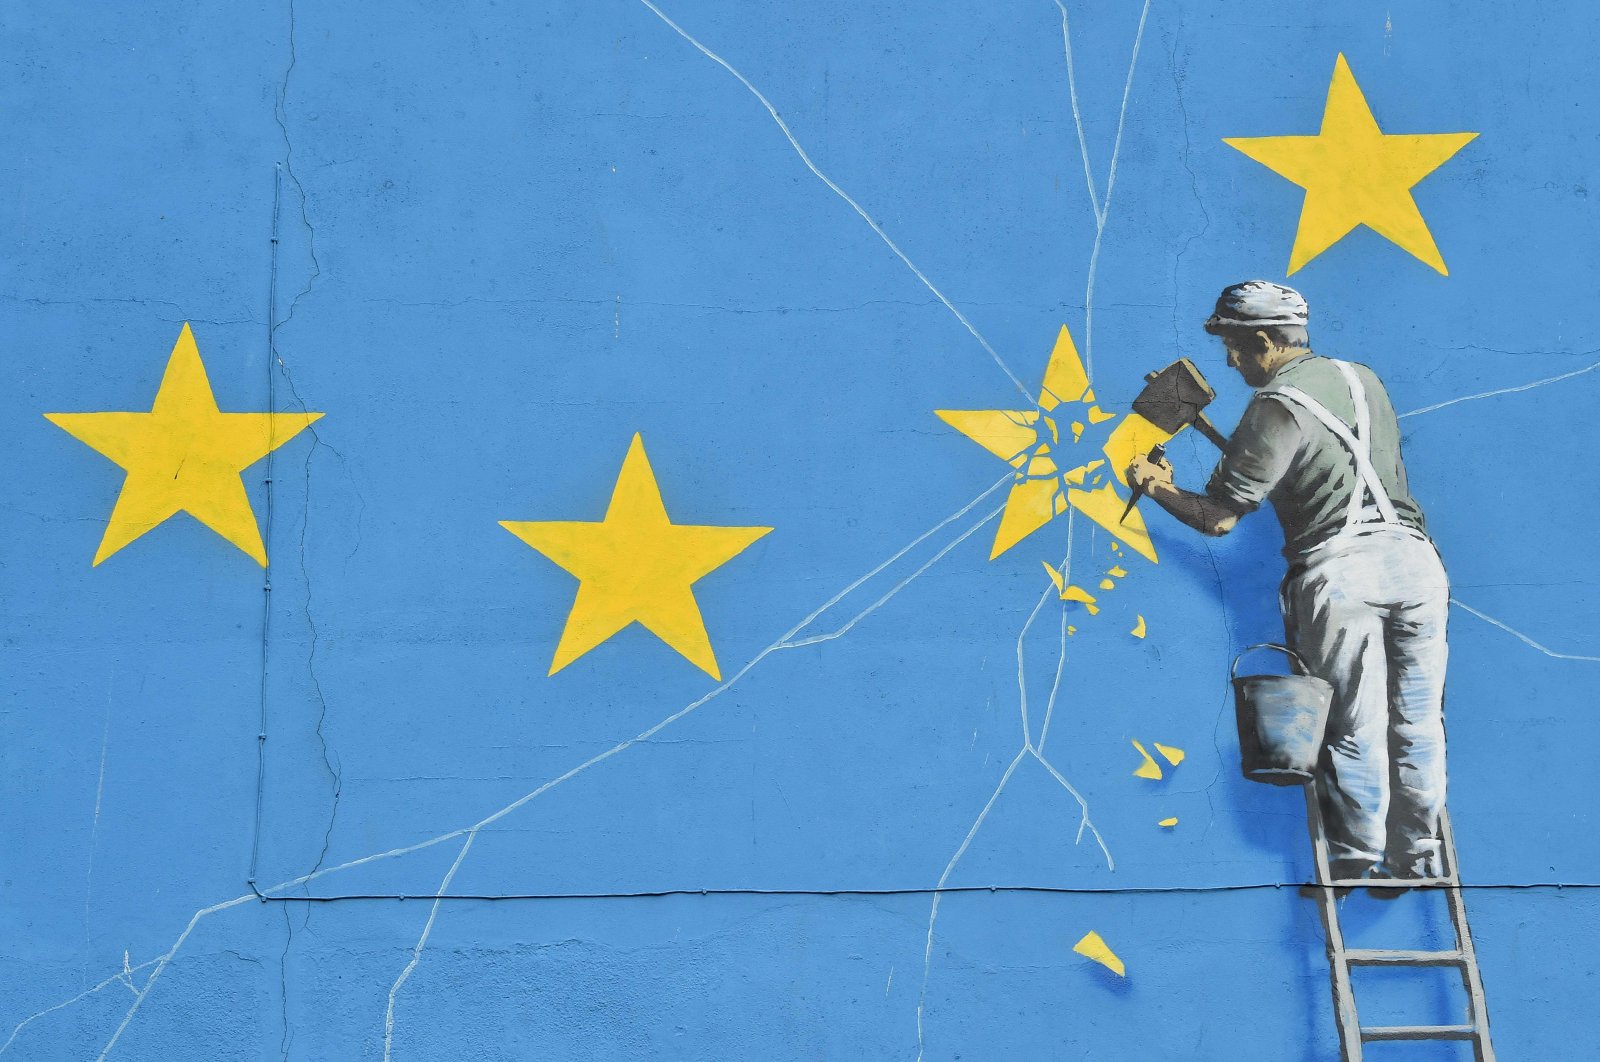  This file photo taken on January 7, 2019 shows a mural by British artist Banksy, depicting a workman chipping away at one of the stars on a European Union (EU) themed flag,in Dover, south east England. - Britain leaves the European Union on January 31, ending more than four decades of economic, political and legal integration with its closest neighbours. (Photo by Glyn KIRK / AFP)